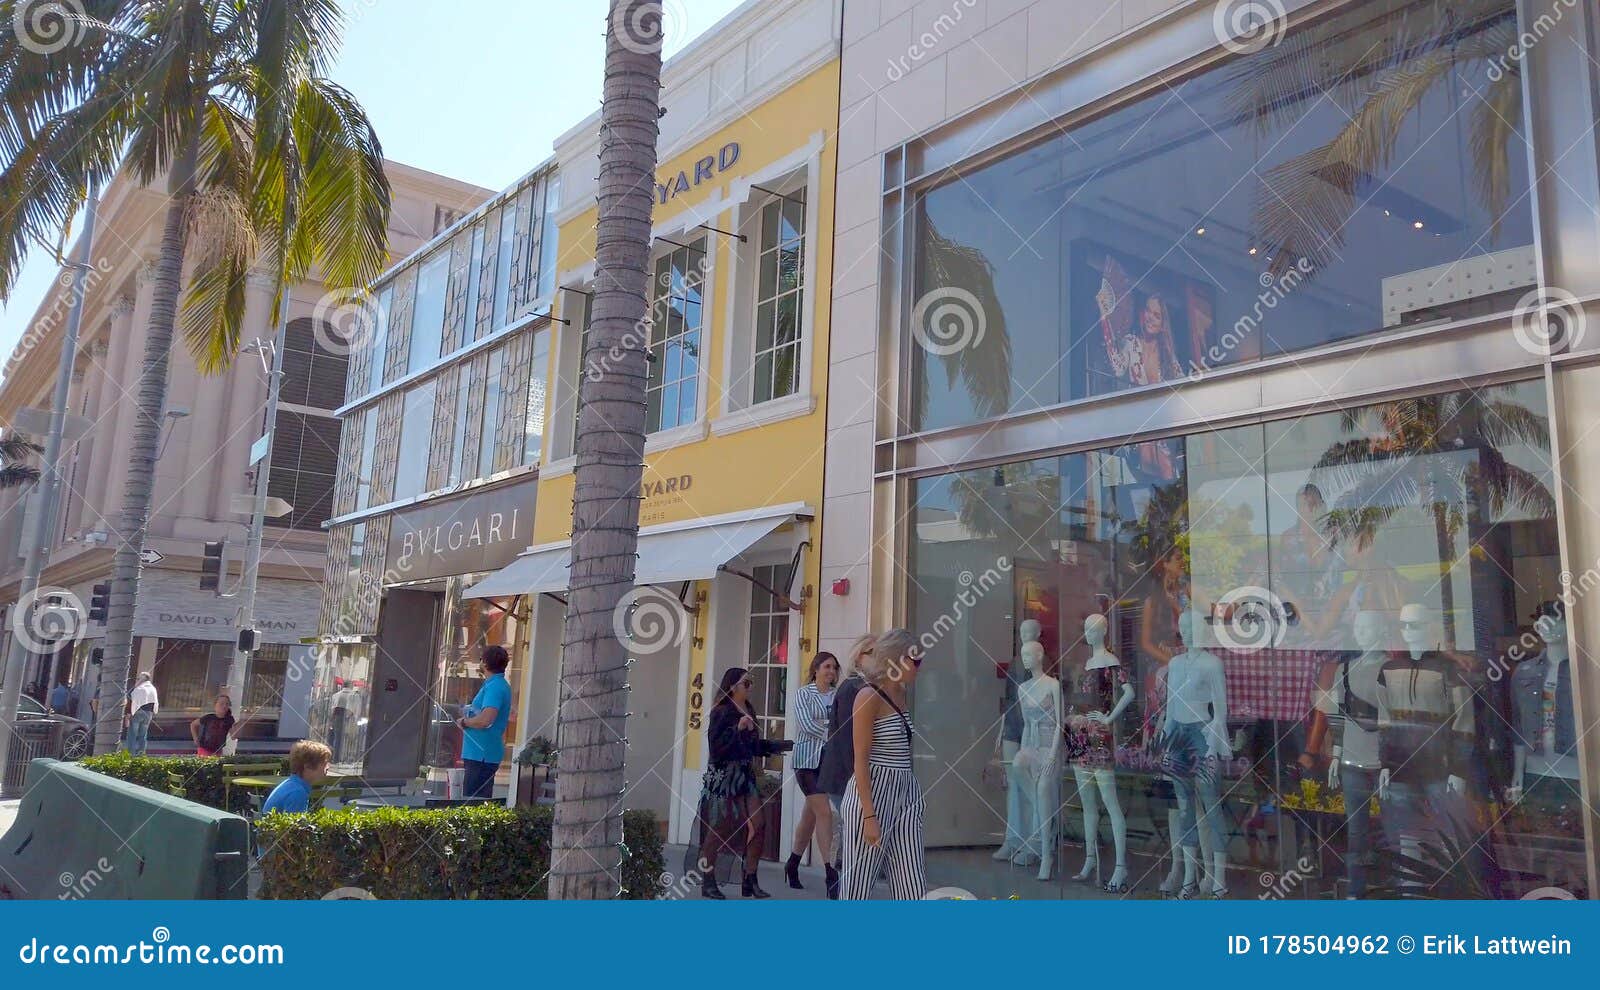 Rodeo Drive in Beverly Hills - Store - LOS USA - APRIL 1, 2019 Editorial Photography - Image of nostalgic, successful: 178504962